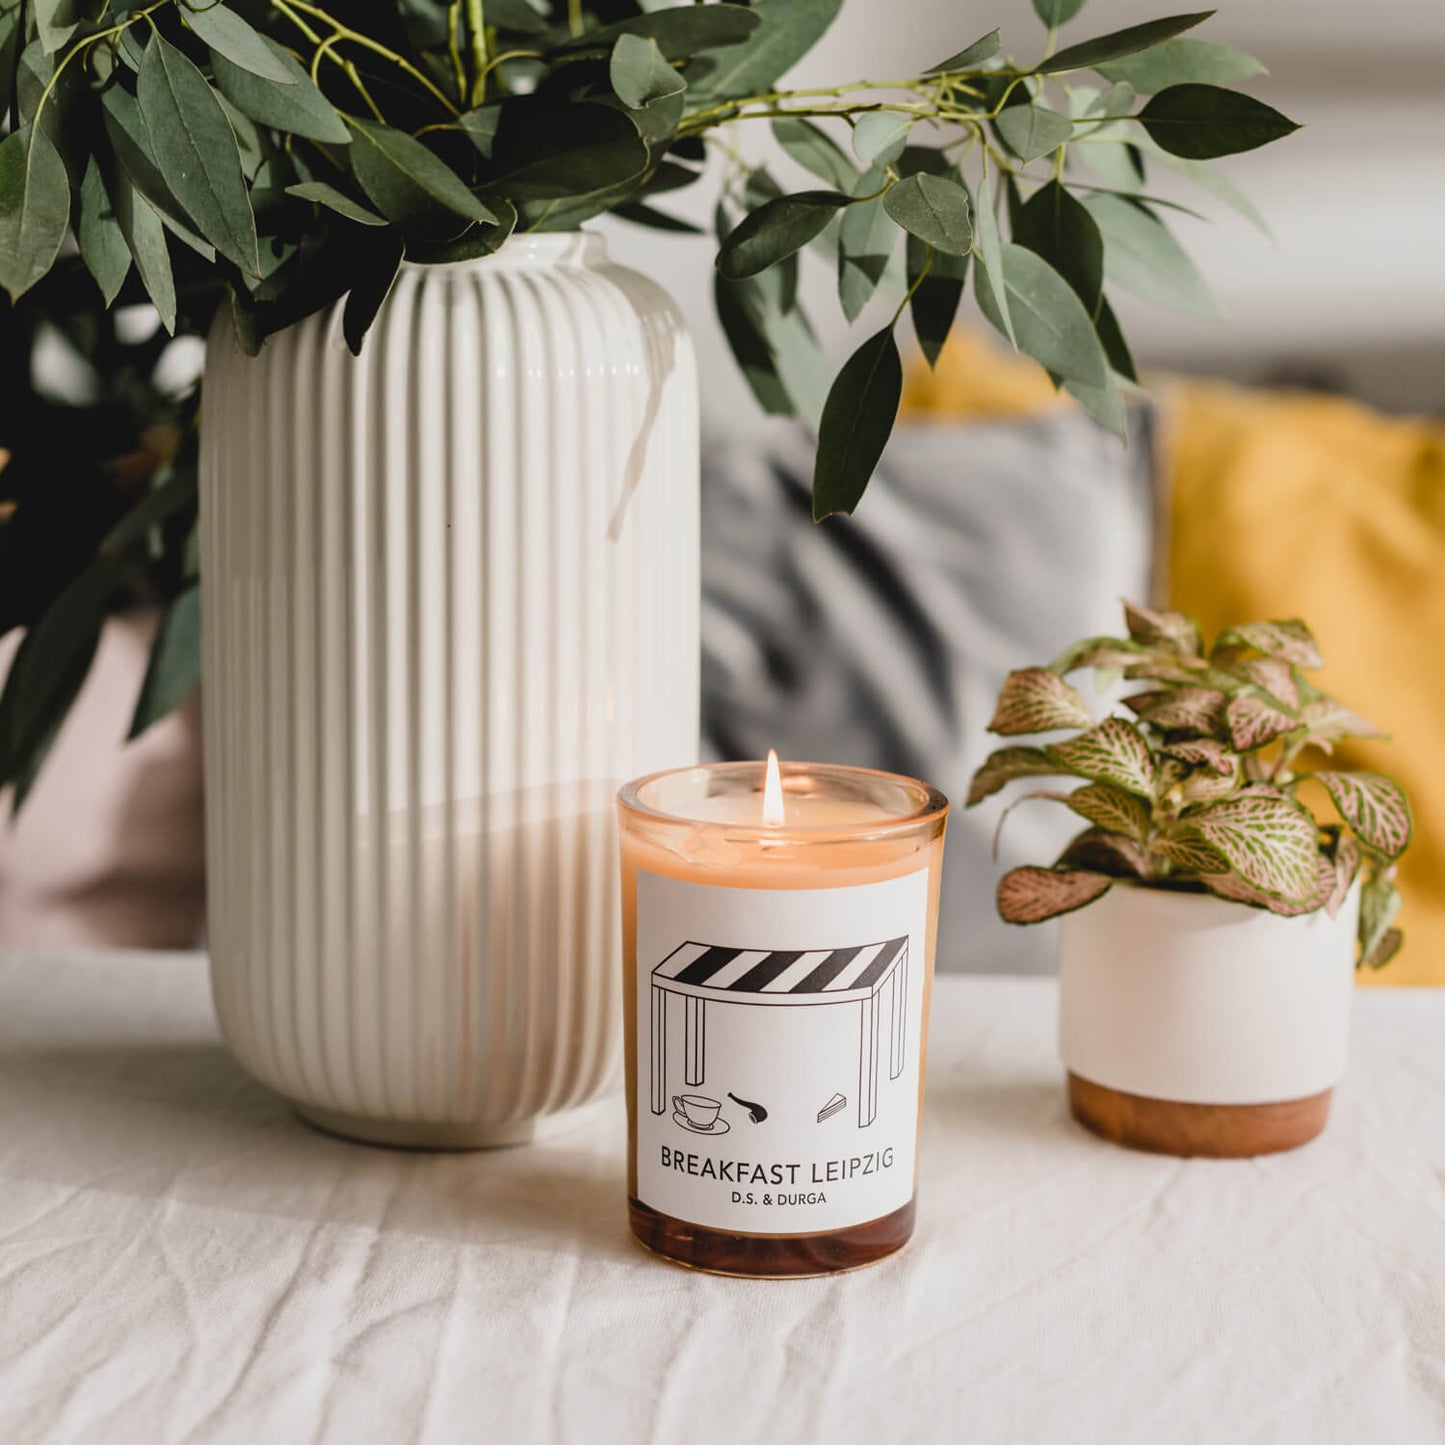 Breakfast Leipzig Scented Candle by D.S. & DURGA